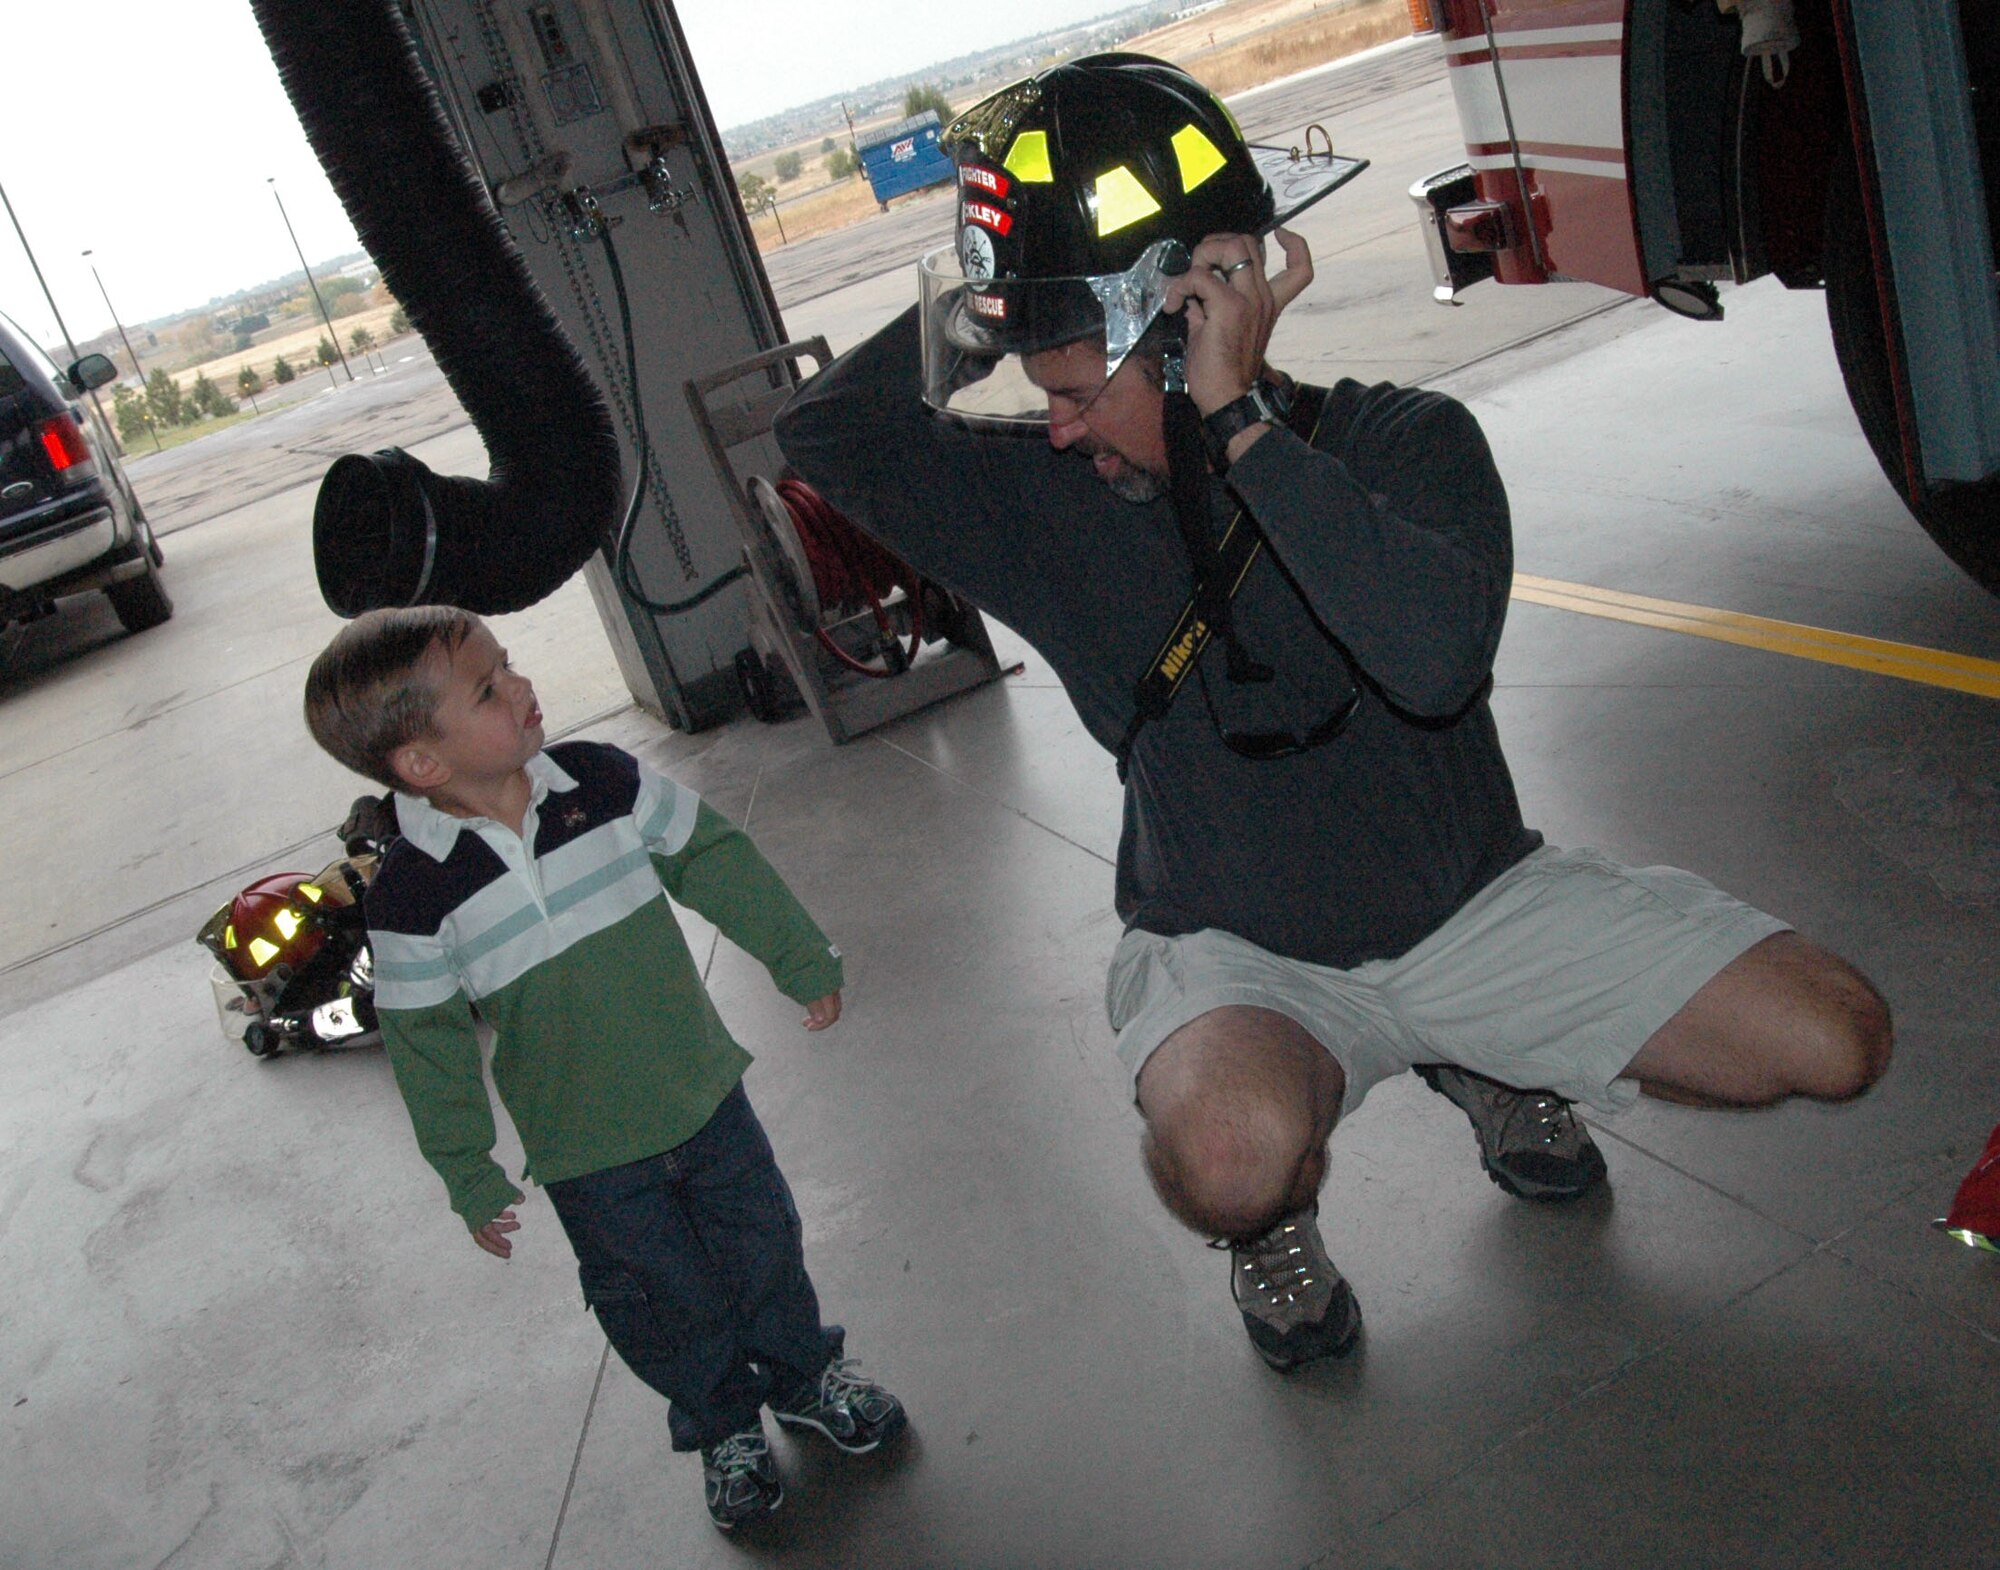 BUCKLEY AIR FORCE BASE, Colo. -- Dave McGowan, a military spouse, models a fireman's helmet for his son Callahan during the Buckley Fire Department's open house Oct. 13. The fire department hosted an open house and conducted a fire truck parade through base housing that day to celebrate the ending of fire prevention week. (U.S. Air Force photo by Senior Airman Jacque Lickteig)